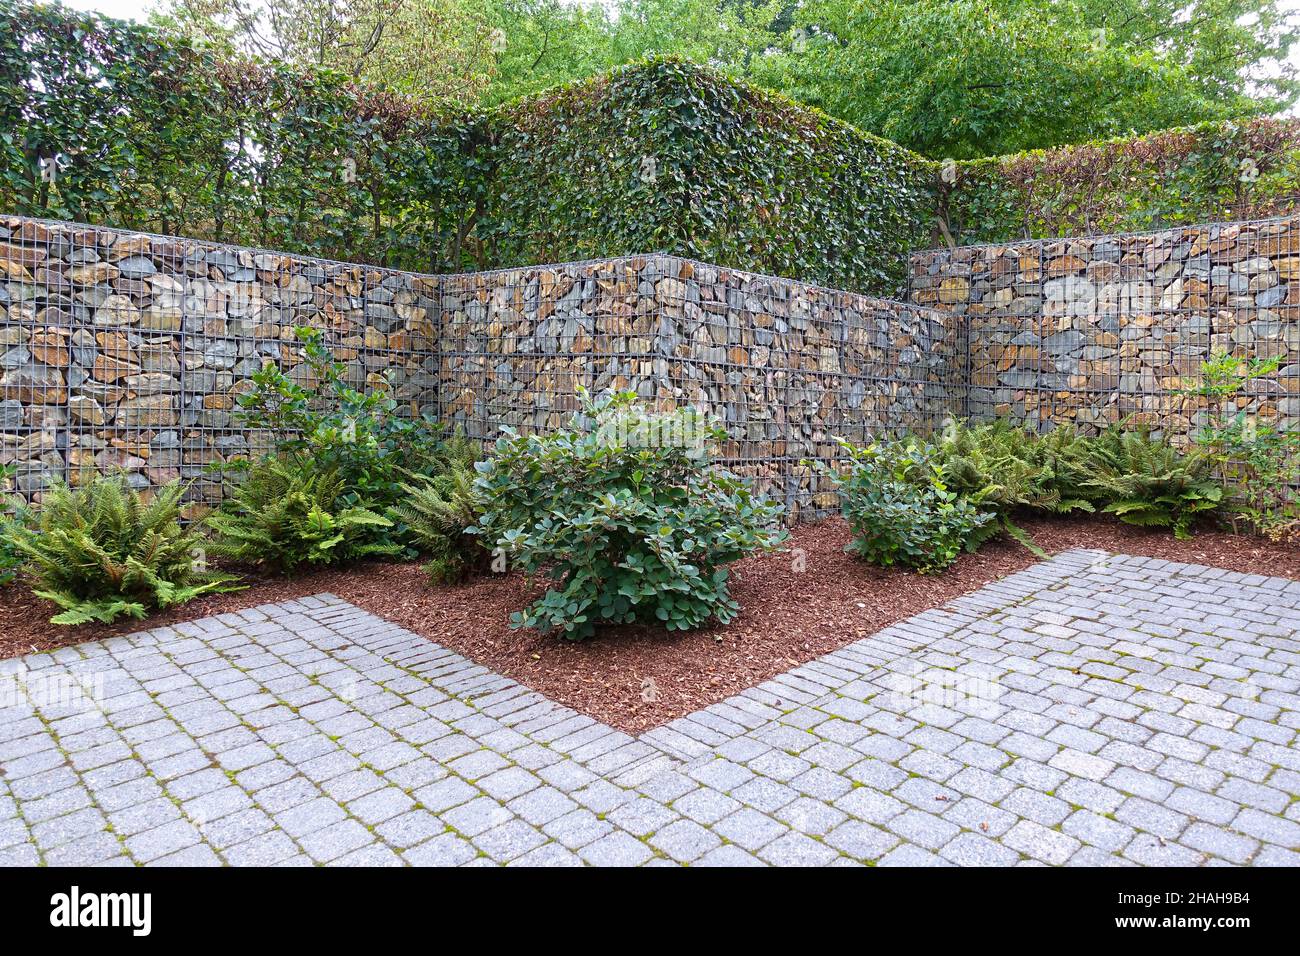 Modern enclosure made of a natural stone or gabion fence, hedge and cobblestone pavement. Stock Photo